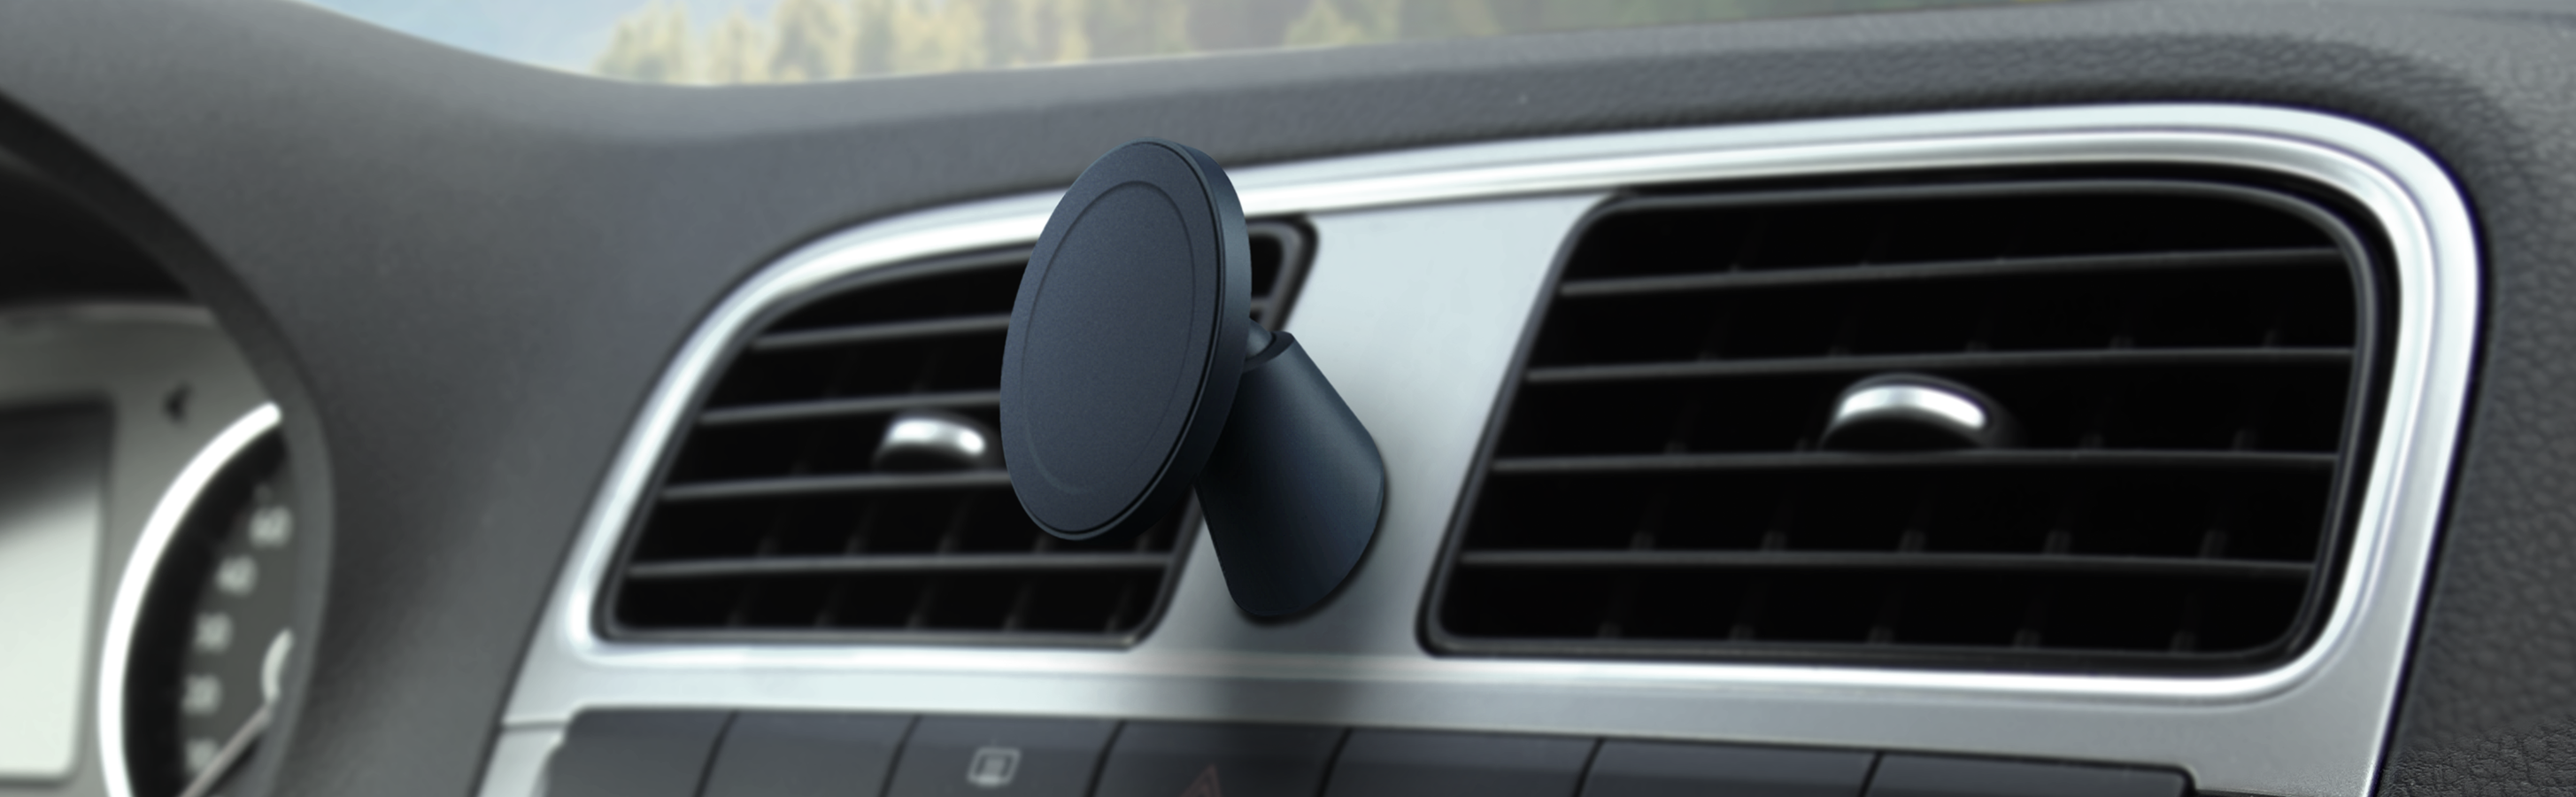 Velox Magnetic Flush Mount Car Phone Holder for MagSafe iPhones Mounted on Car Dash